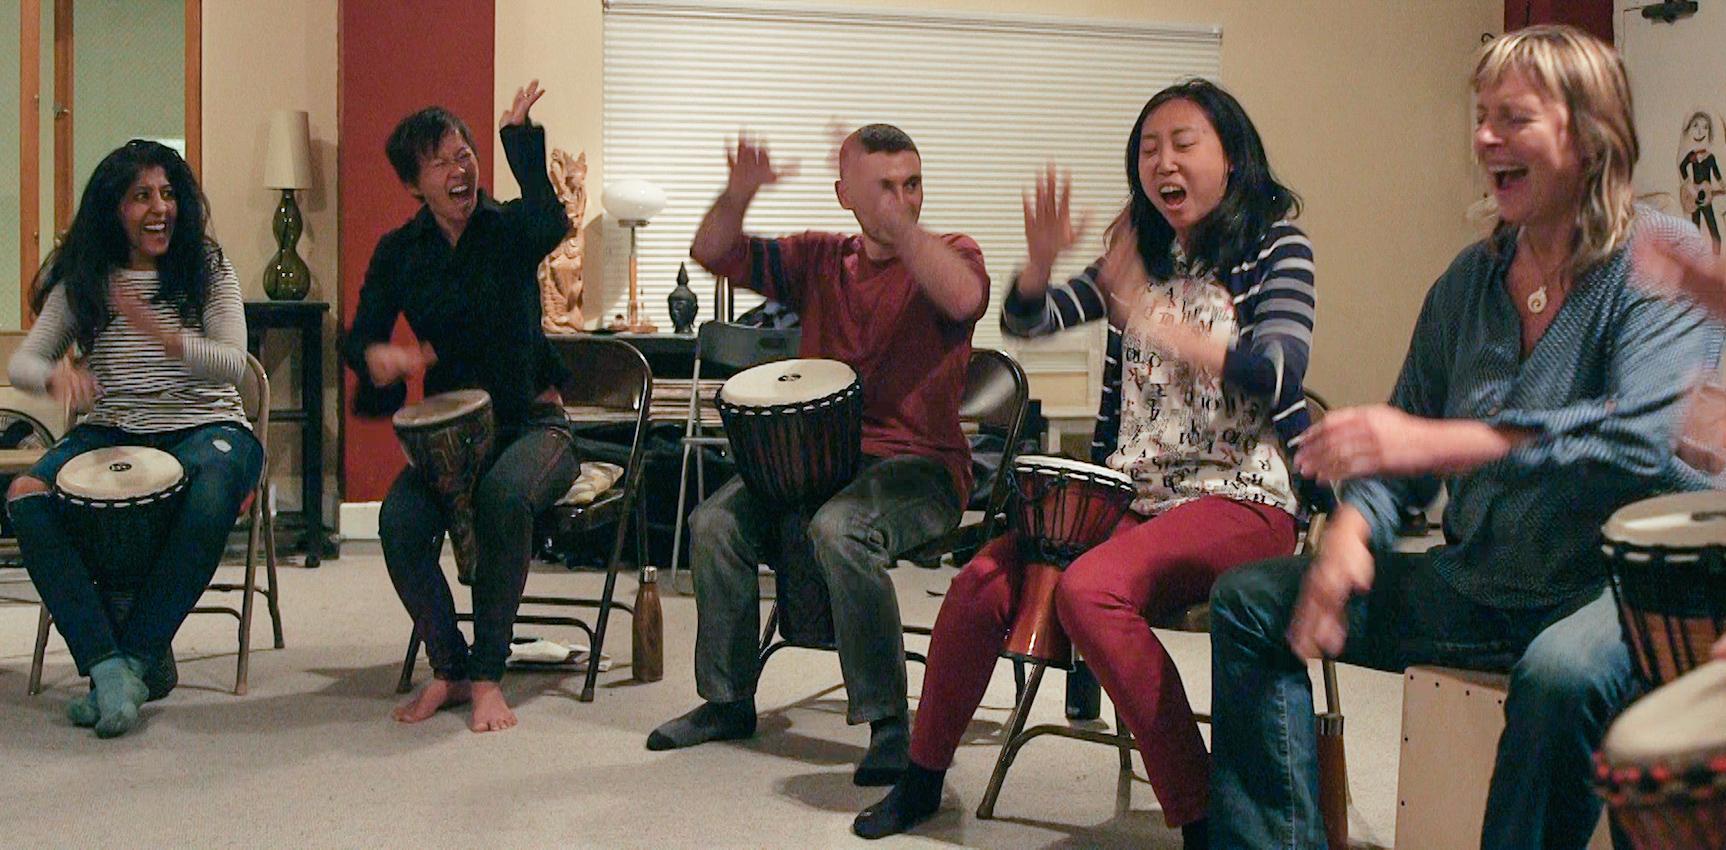 Berkeley Free Your Voice while Drumming 10-wk class